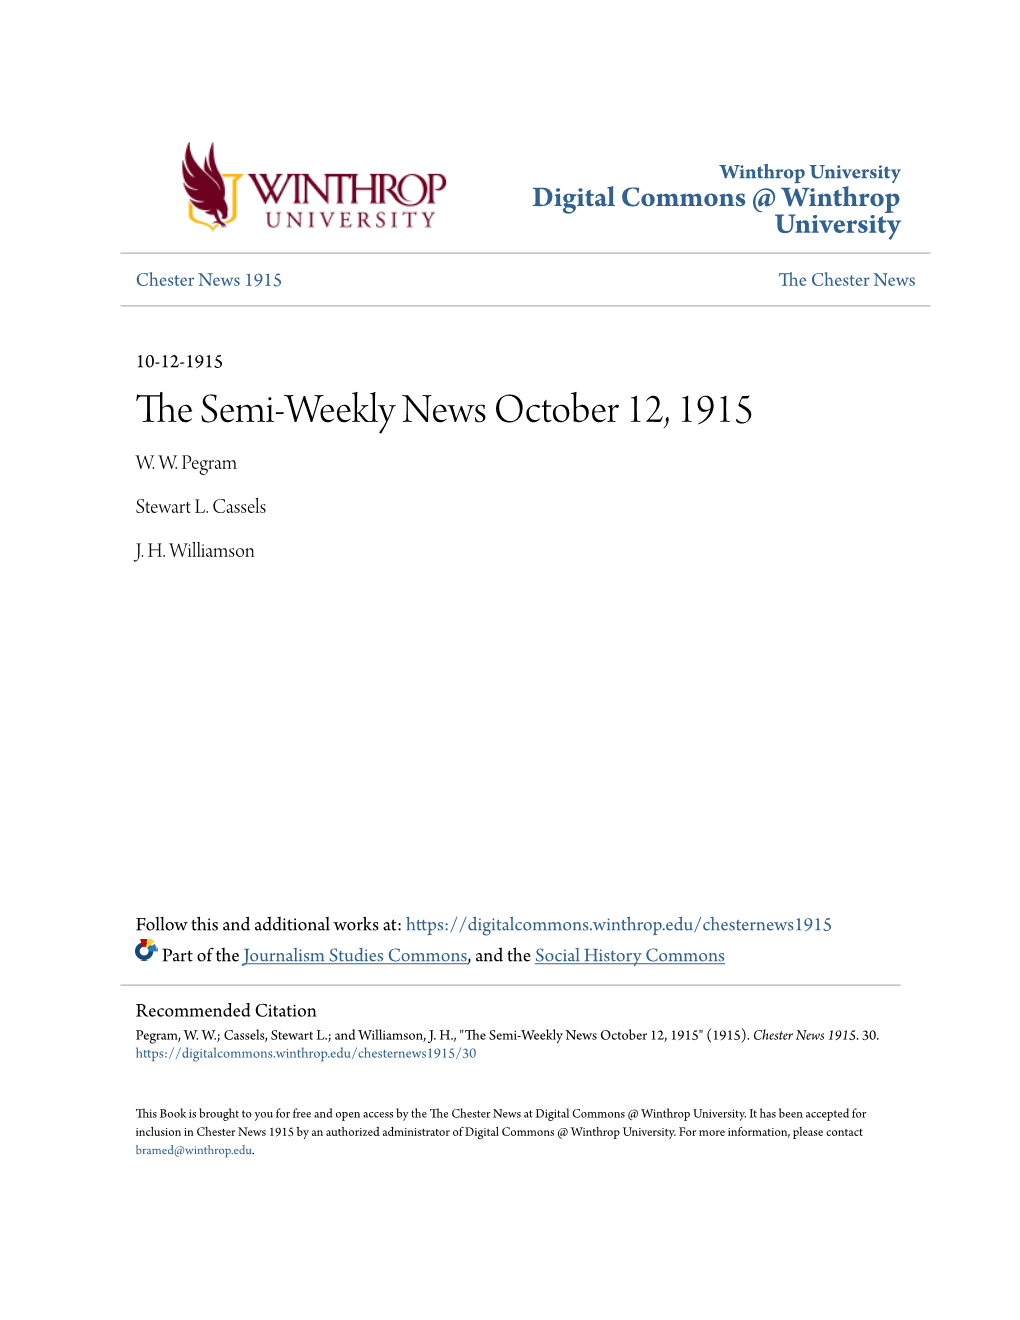 The Semi-Weekly News October 12, 1915